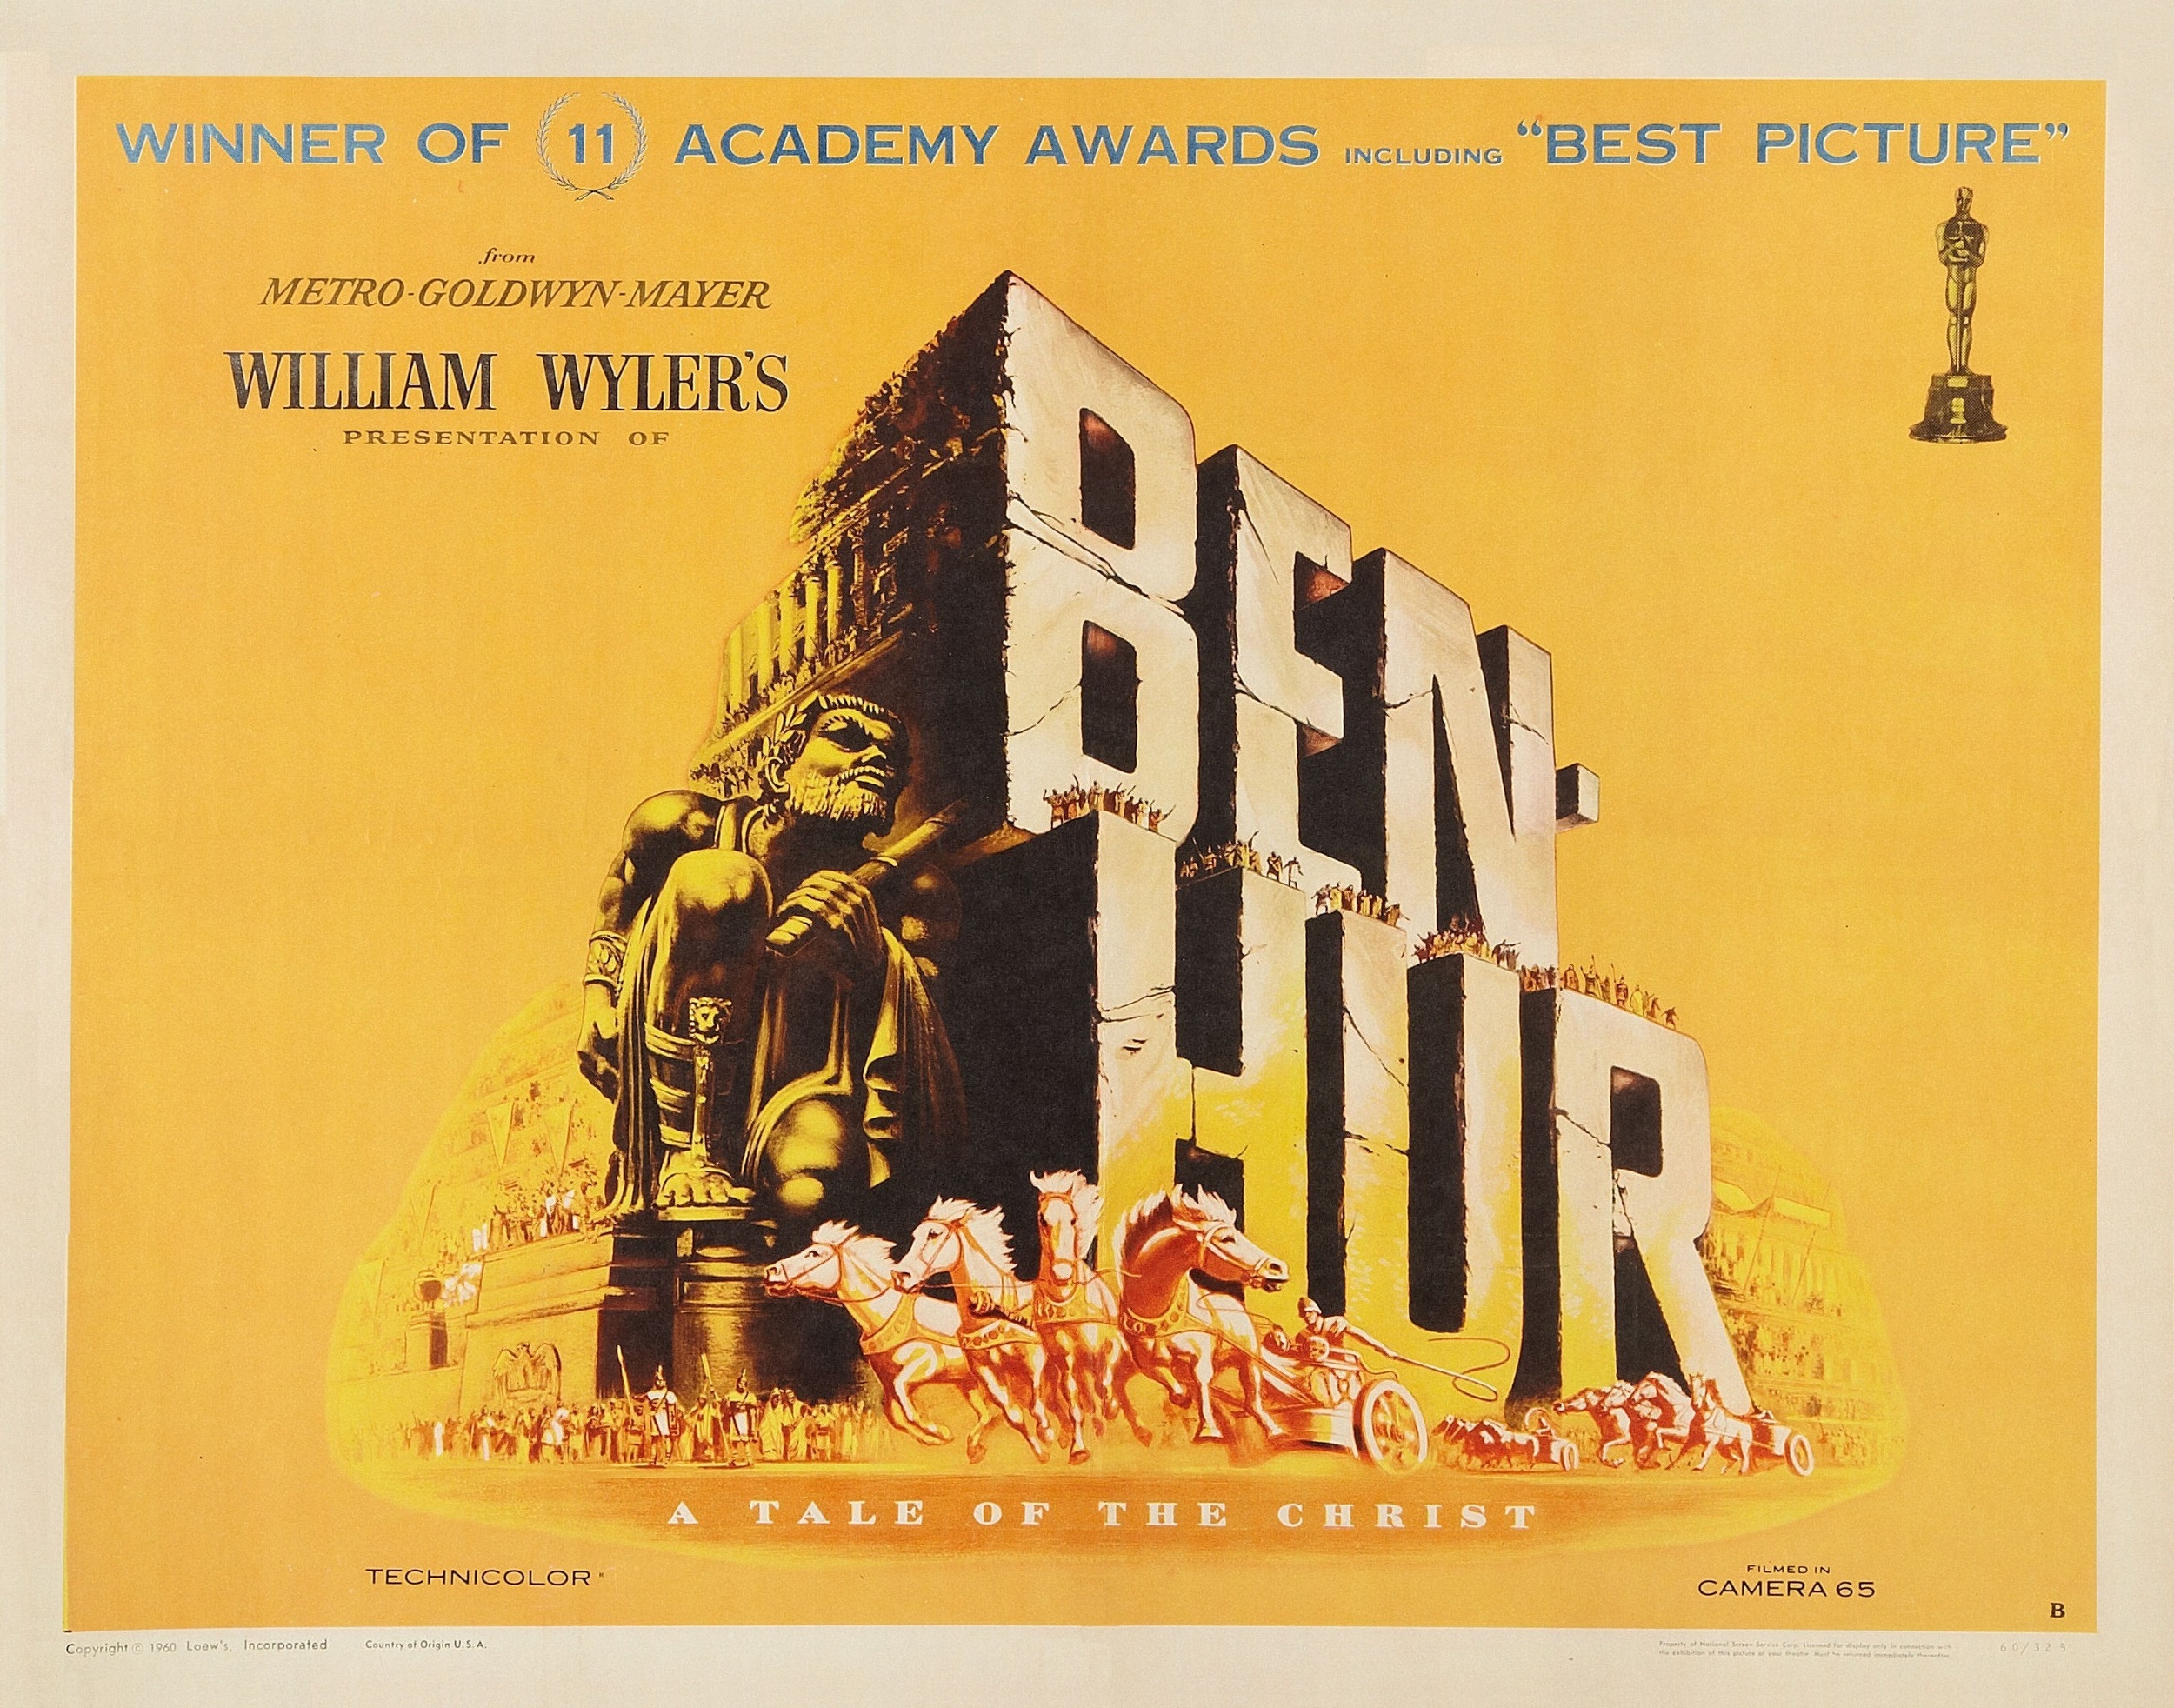 <p>Whereas many of us were required to watch Cecil B. DeMille’s “The Ten Commandments” and the “Jesus of Nazareth” NBC miniseries in Sunday school, William Wyler’s more visually spectacular and entertaining “Ben-Hur” tends to be the odd Biblical epic out. This 222-minute tale of a Jewish prince (Charlton Heston) challenging the Roman Empire certainly doesn’t jump out of the blocks at a full sprint, and its most thrilling sequences, particularly the chariot race, are best appreciated on a towering theater screen. But after a slow start, it becomes plenty involving in its own right, and, if nothing else, a vivid reminder of how they used to make ‘em.</p><p>You may also like: <a href='https://www.yardbarker.com/entertainment/articles/21st_century_tv_shows_canceled_too_soon_030524/s1__38890714'>21st-century TV shows canceled too soon</a></p>